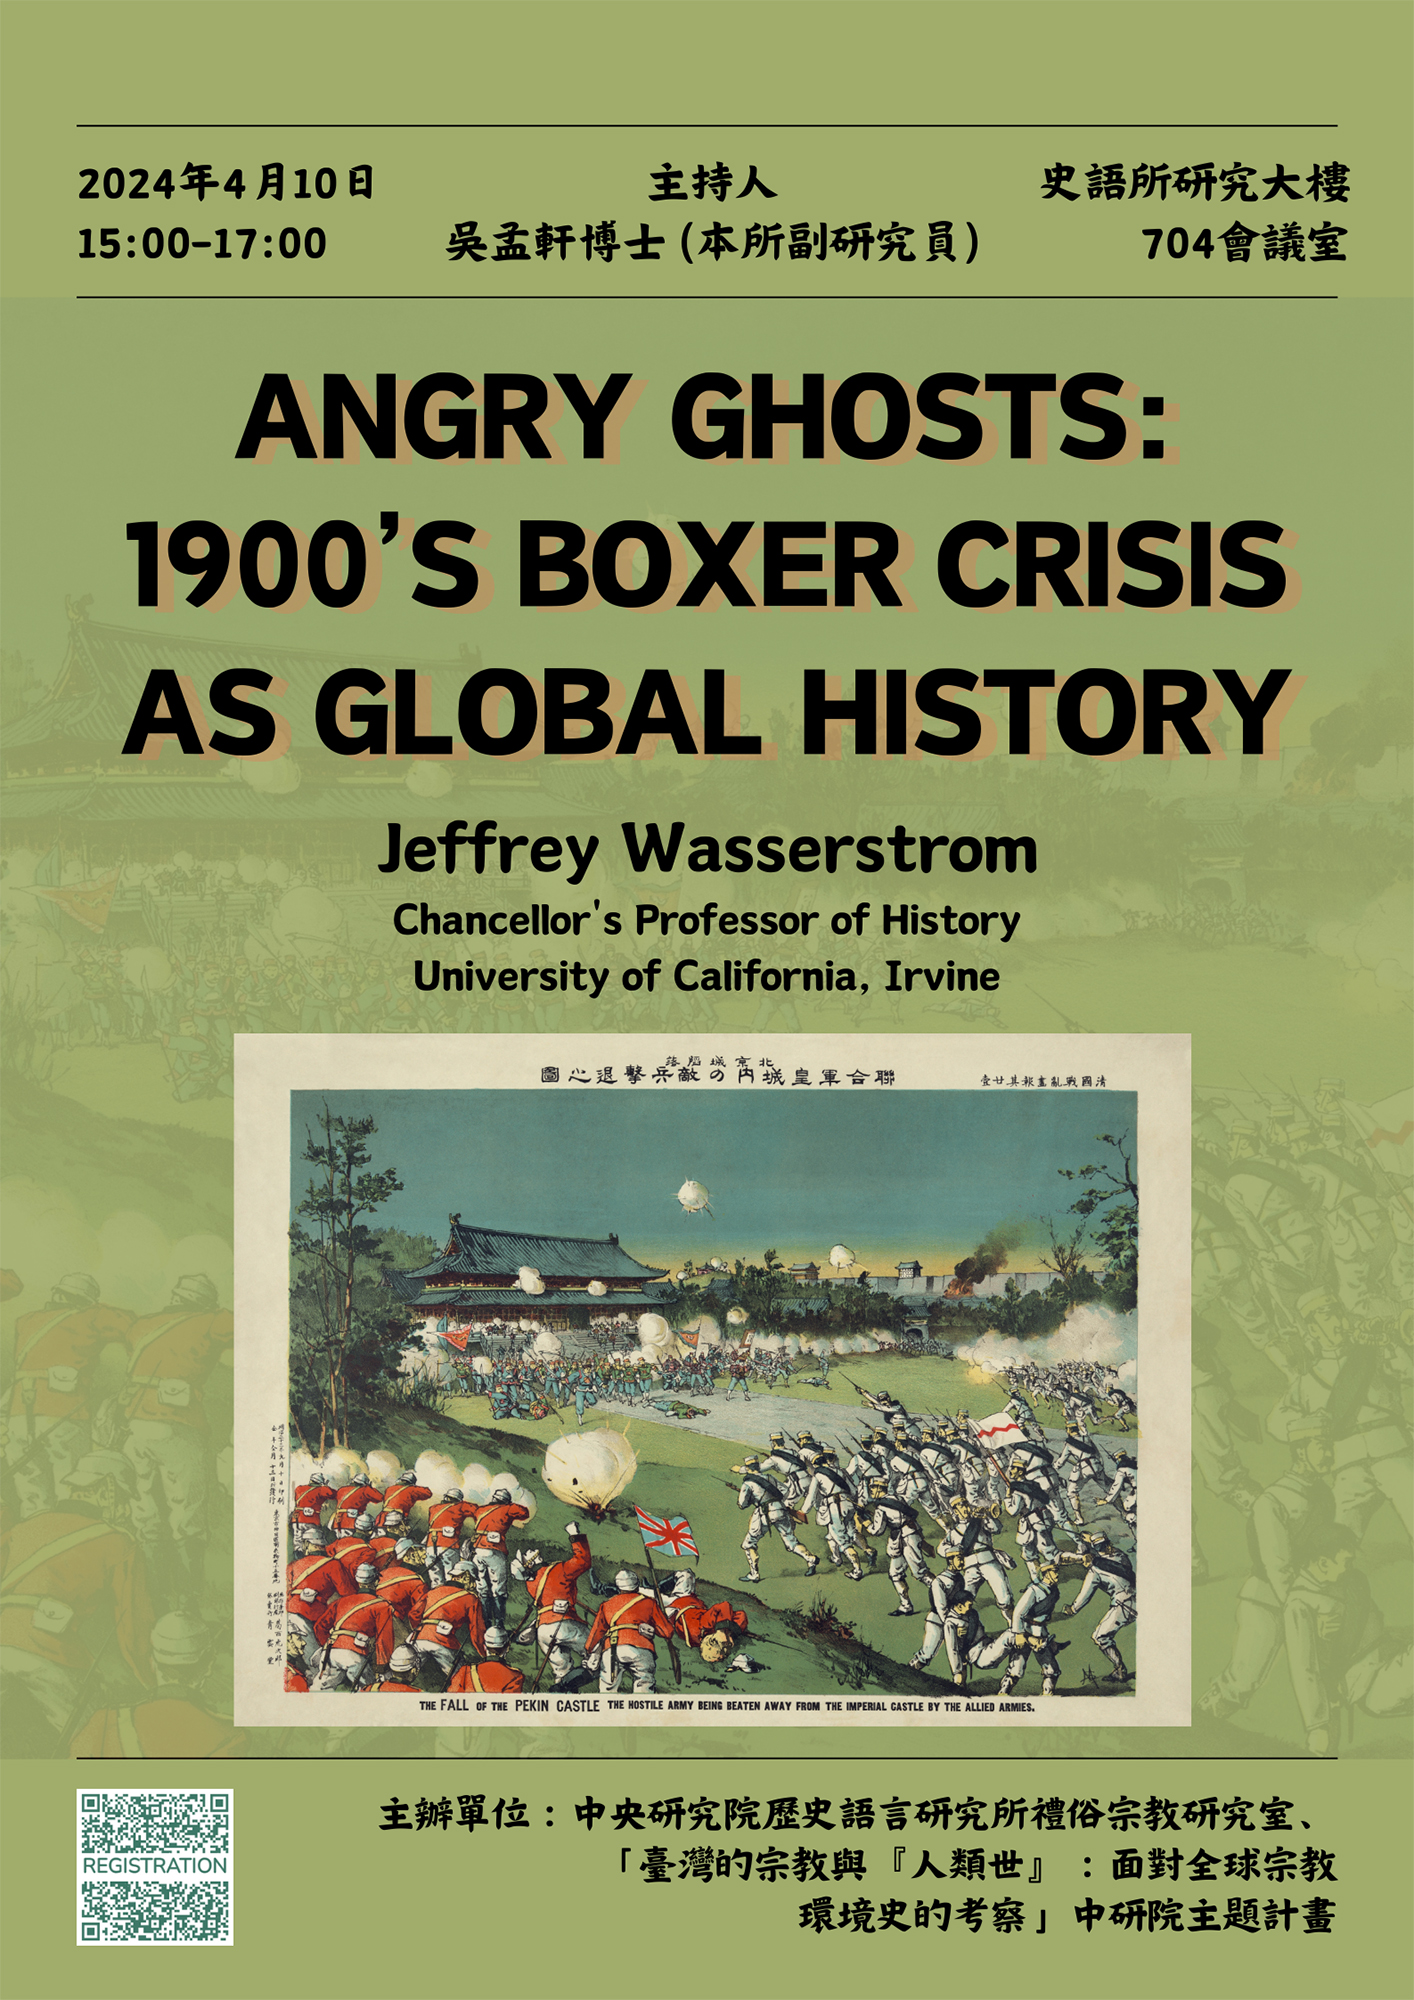 0410_Angry_Ghosts_1900’s_Boxer_Crisis_as_Global_History.jpg